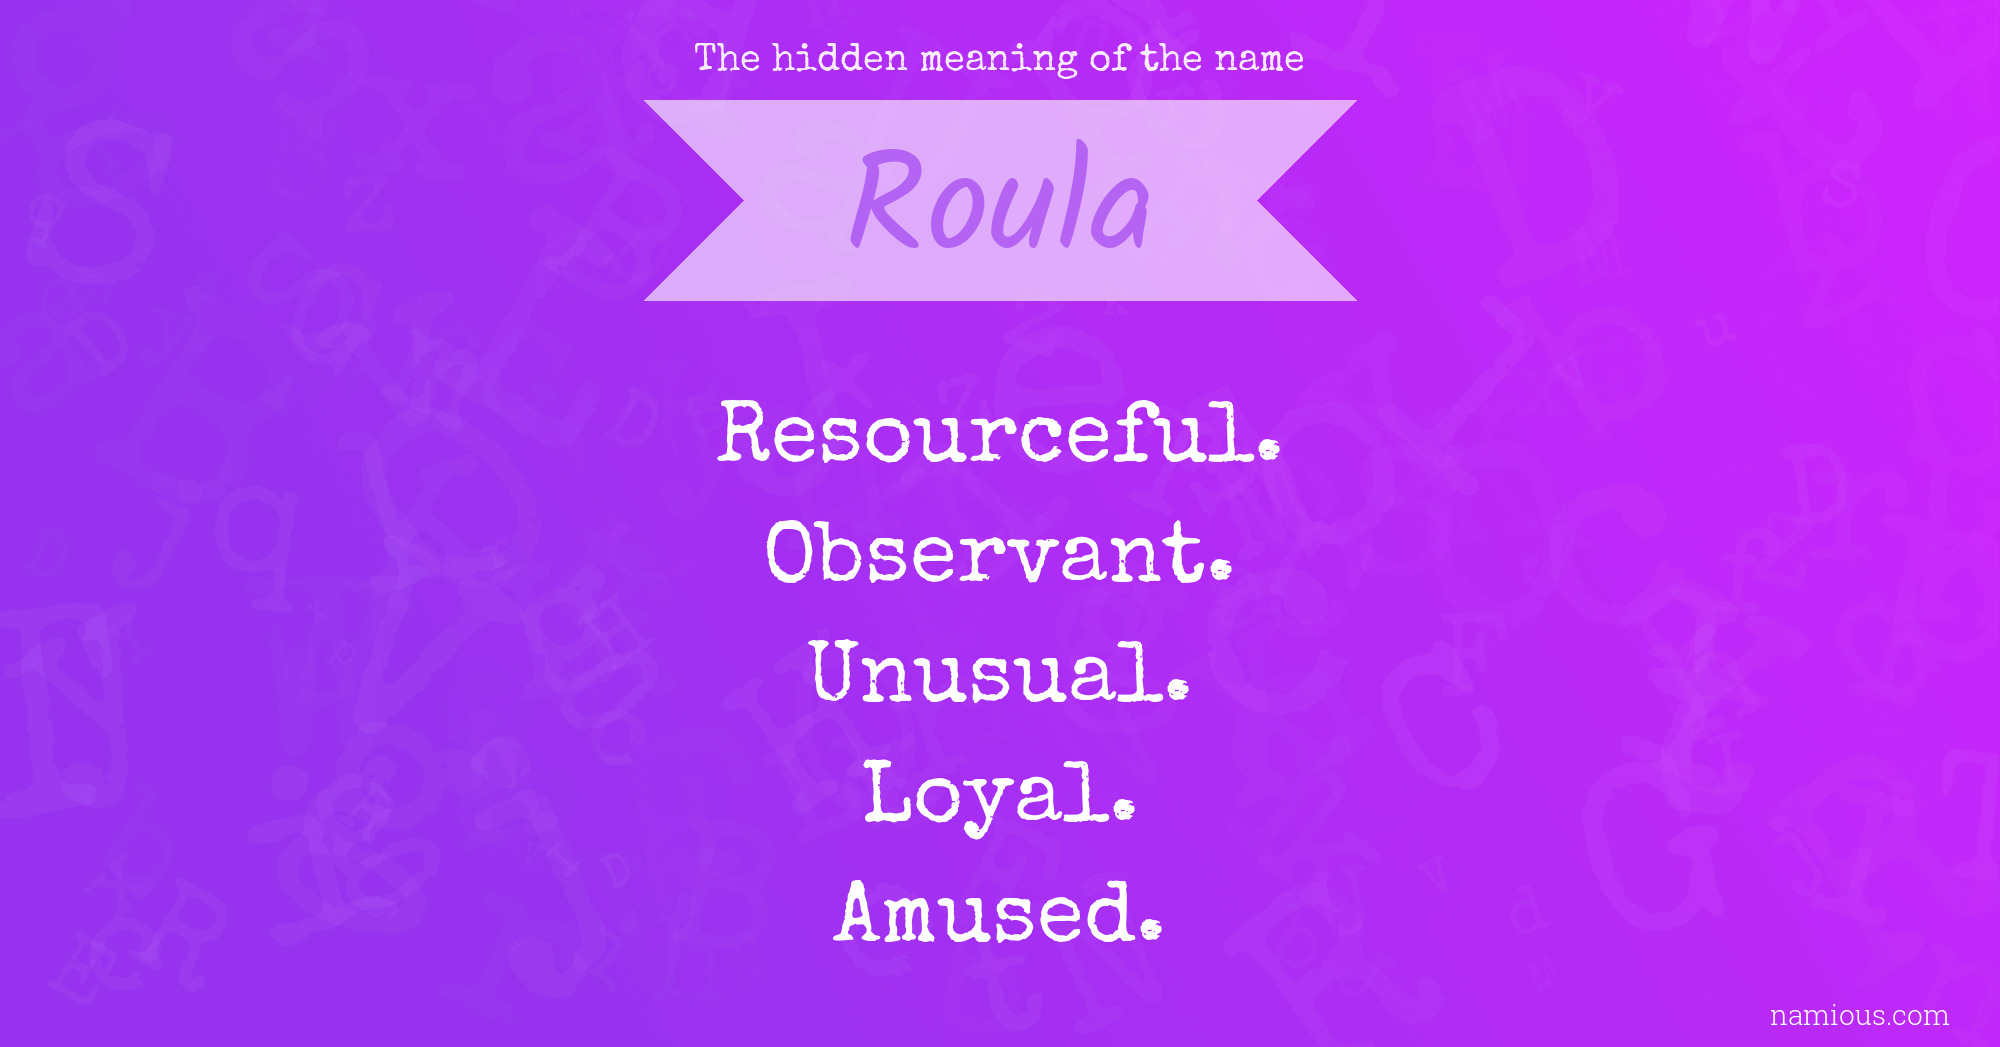 The hidden meaning of the name Roula